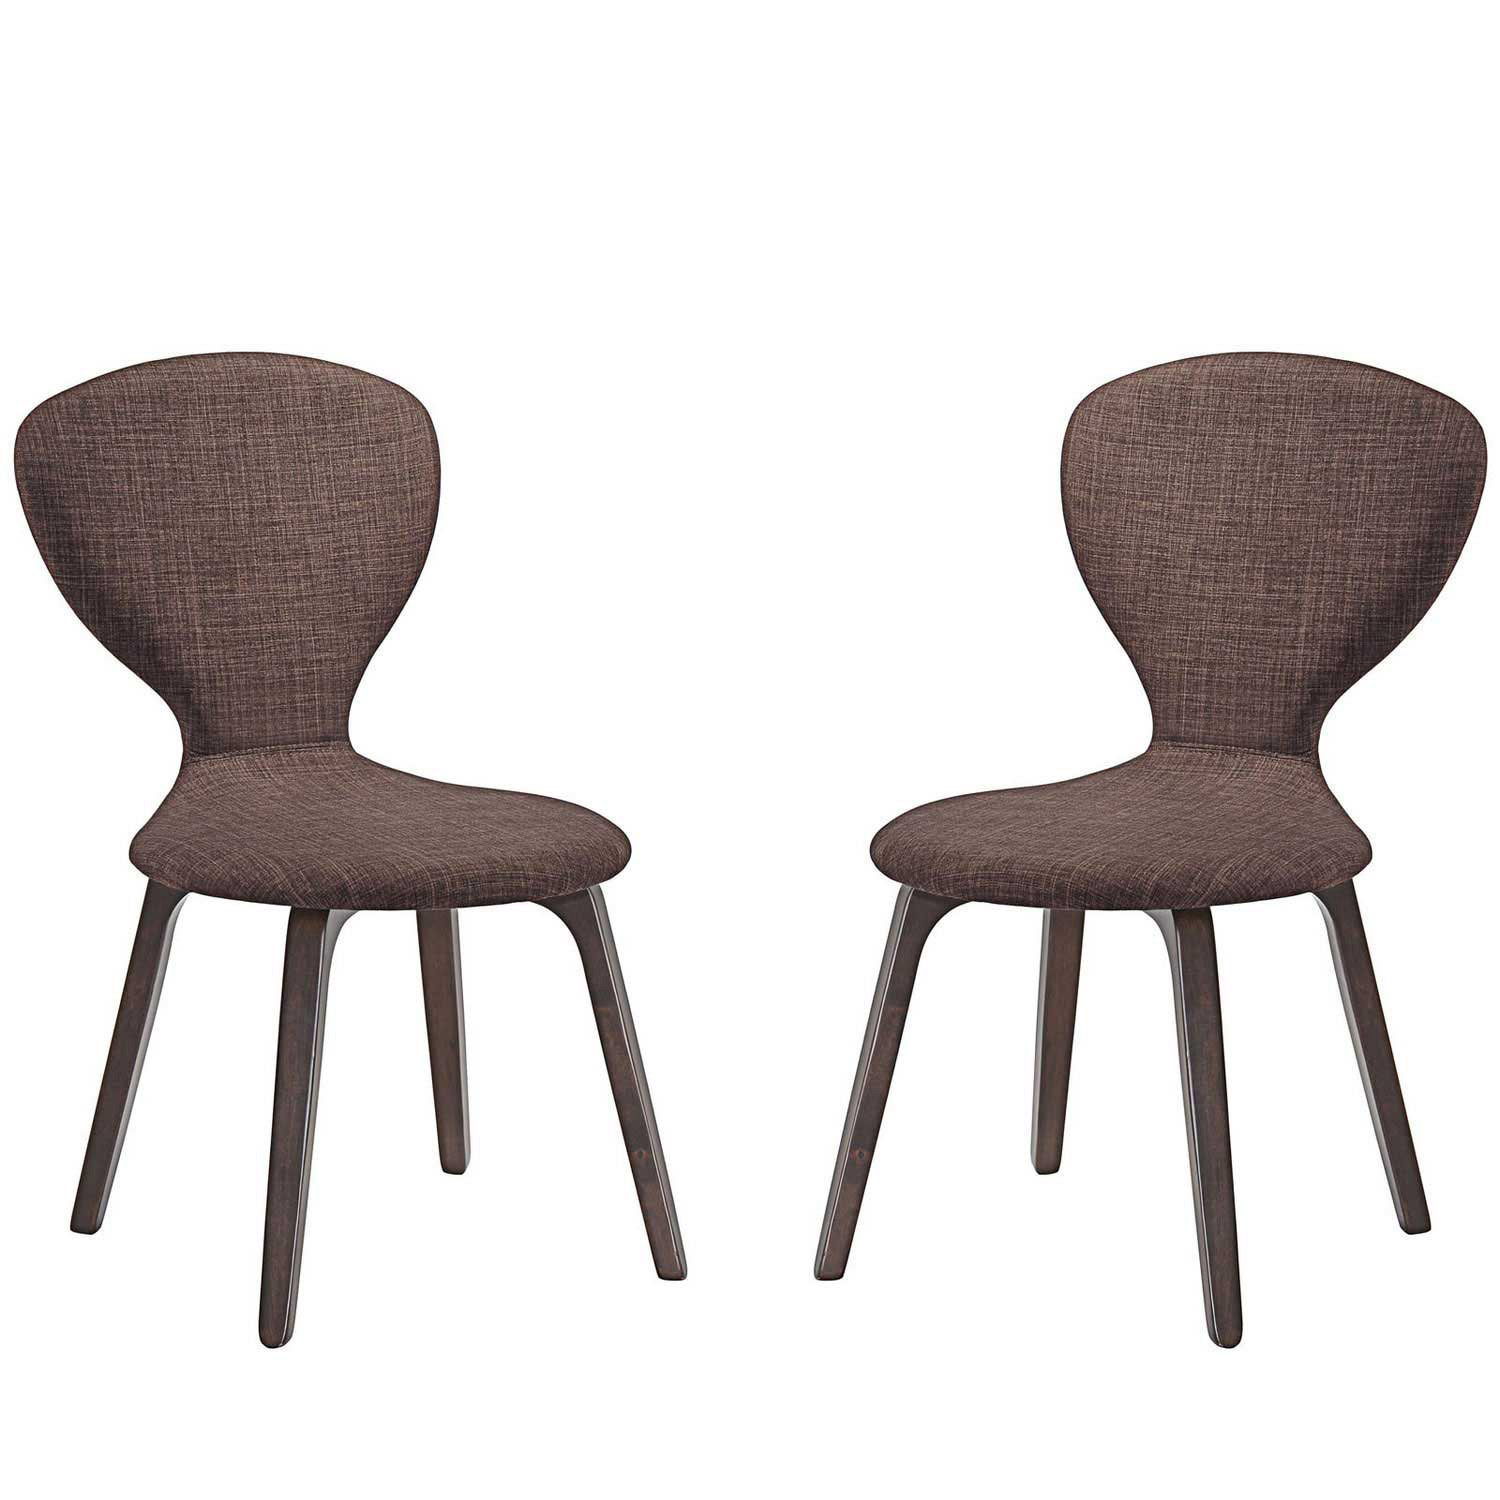 Modway Tempest Dining Side Chair Set of 2 - Walnut Brown